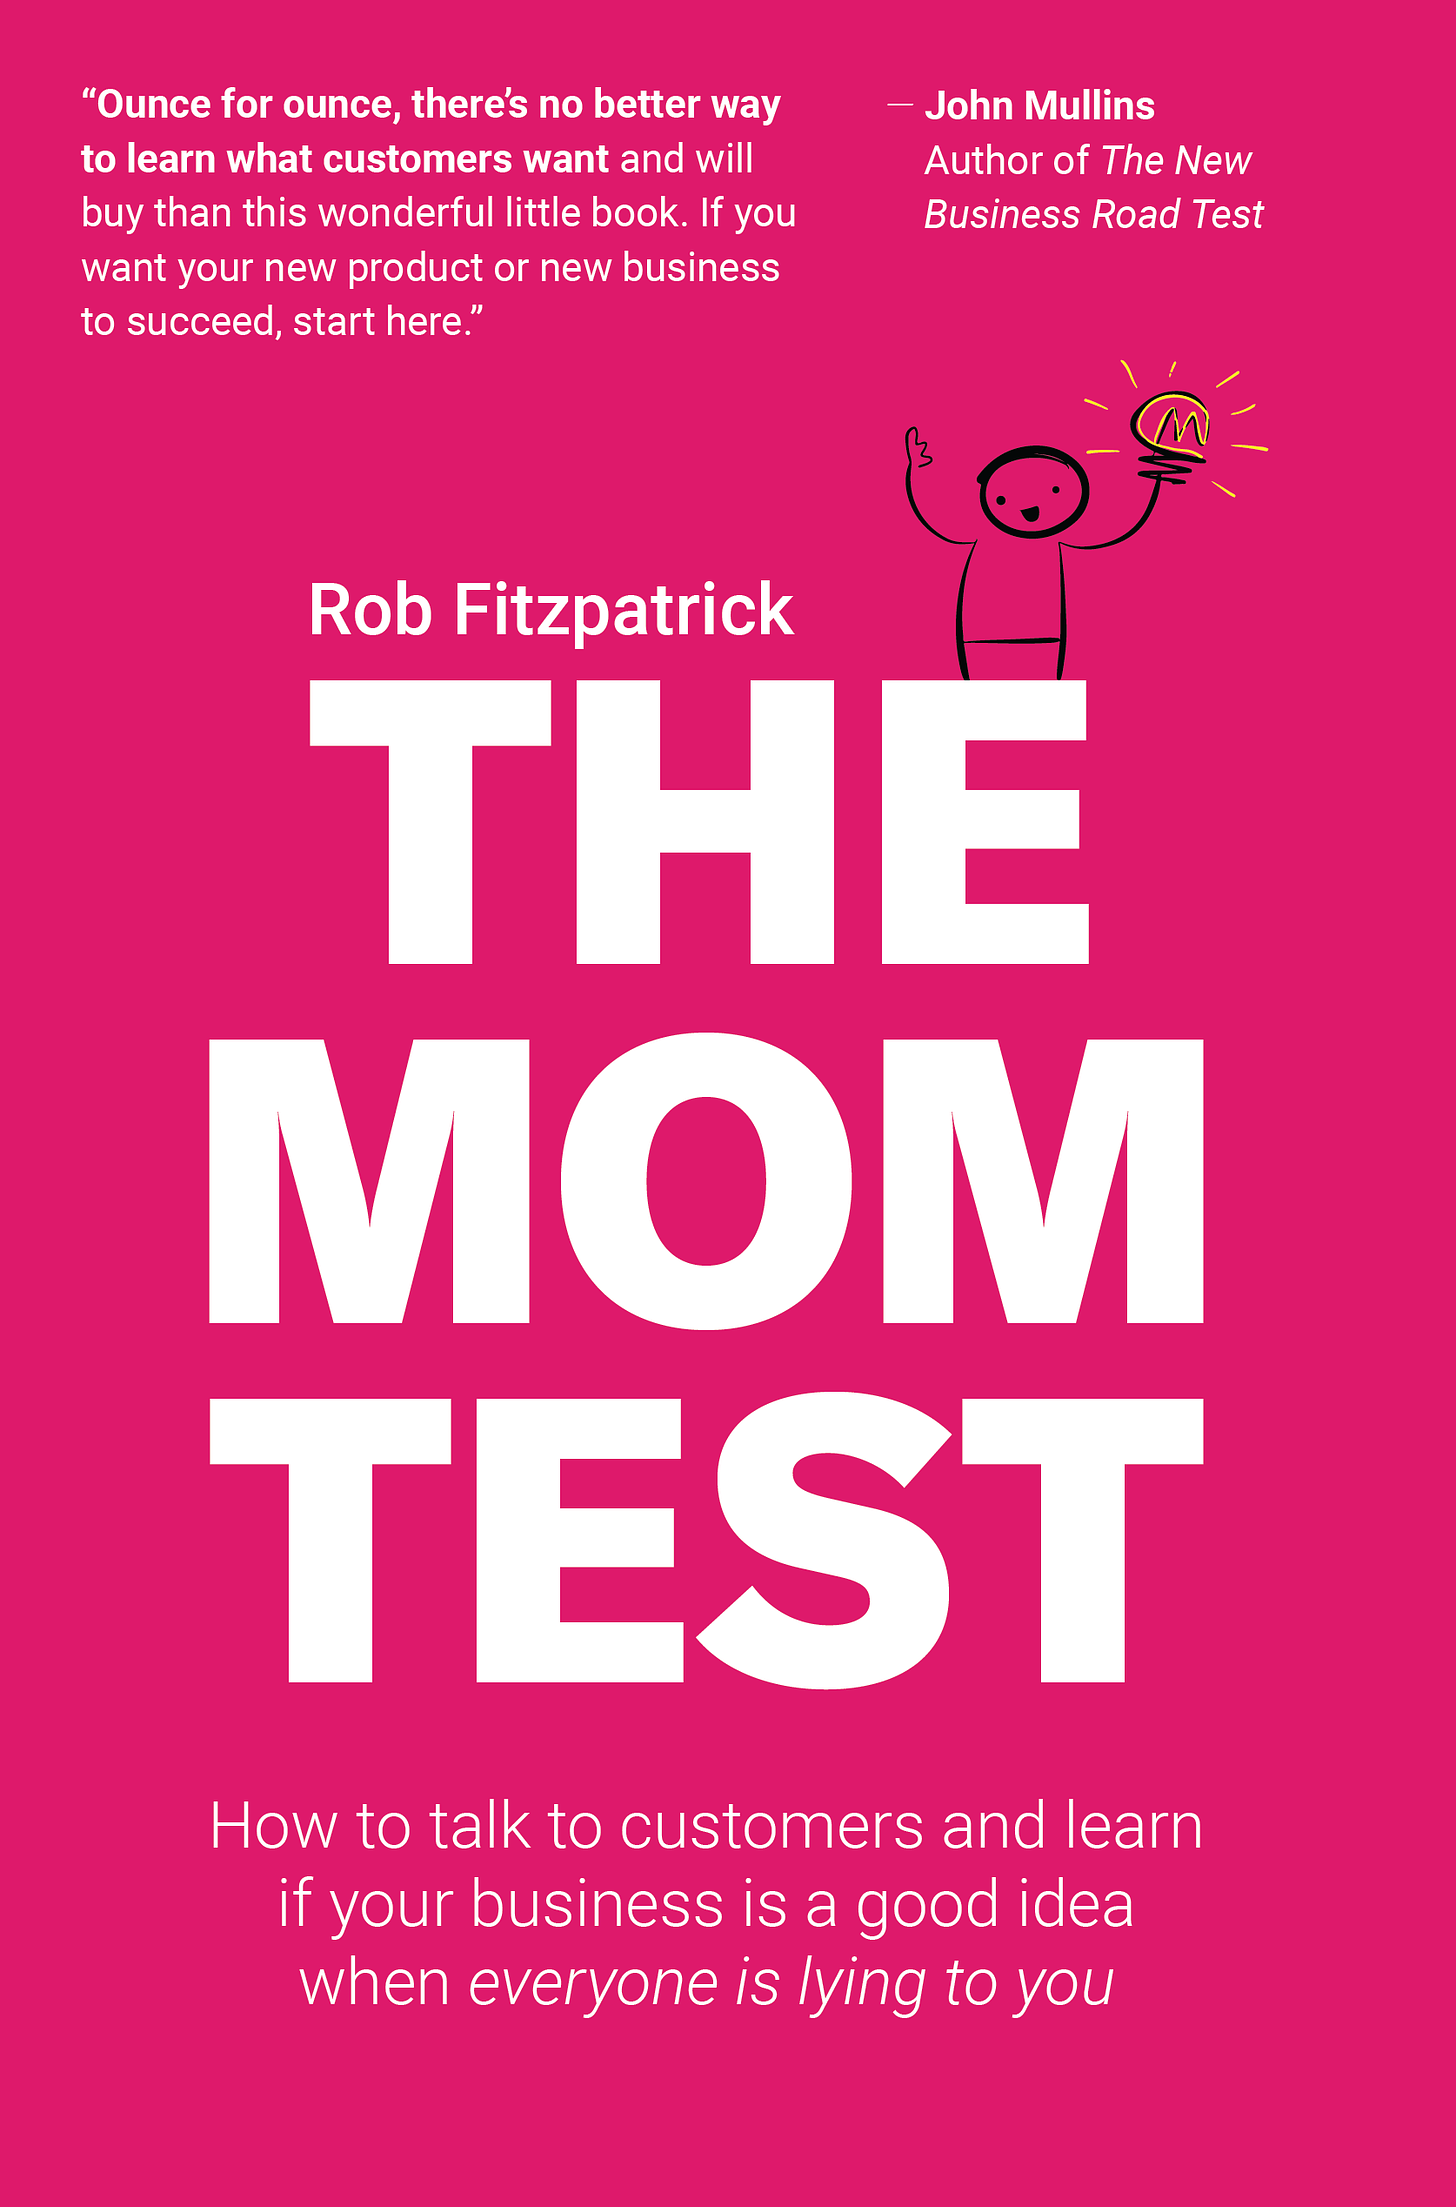 The Mom Test: How to talk to customers & learn if your business is a good  idea when everyone is lying to you by Rob Fitzpatrick | Goodreads